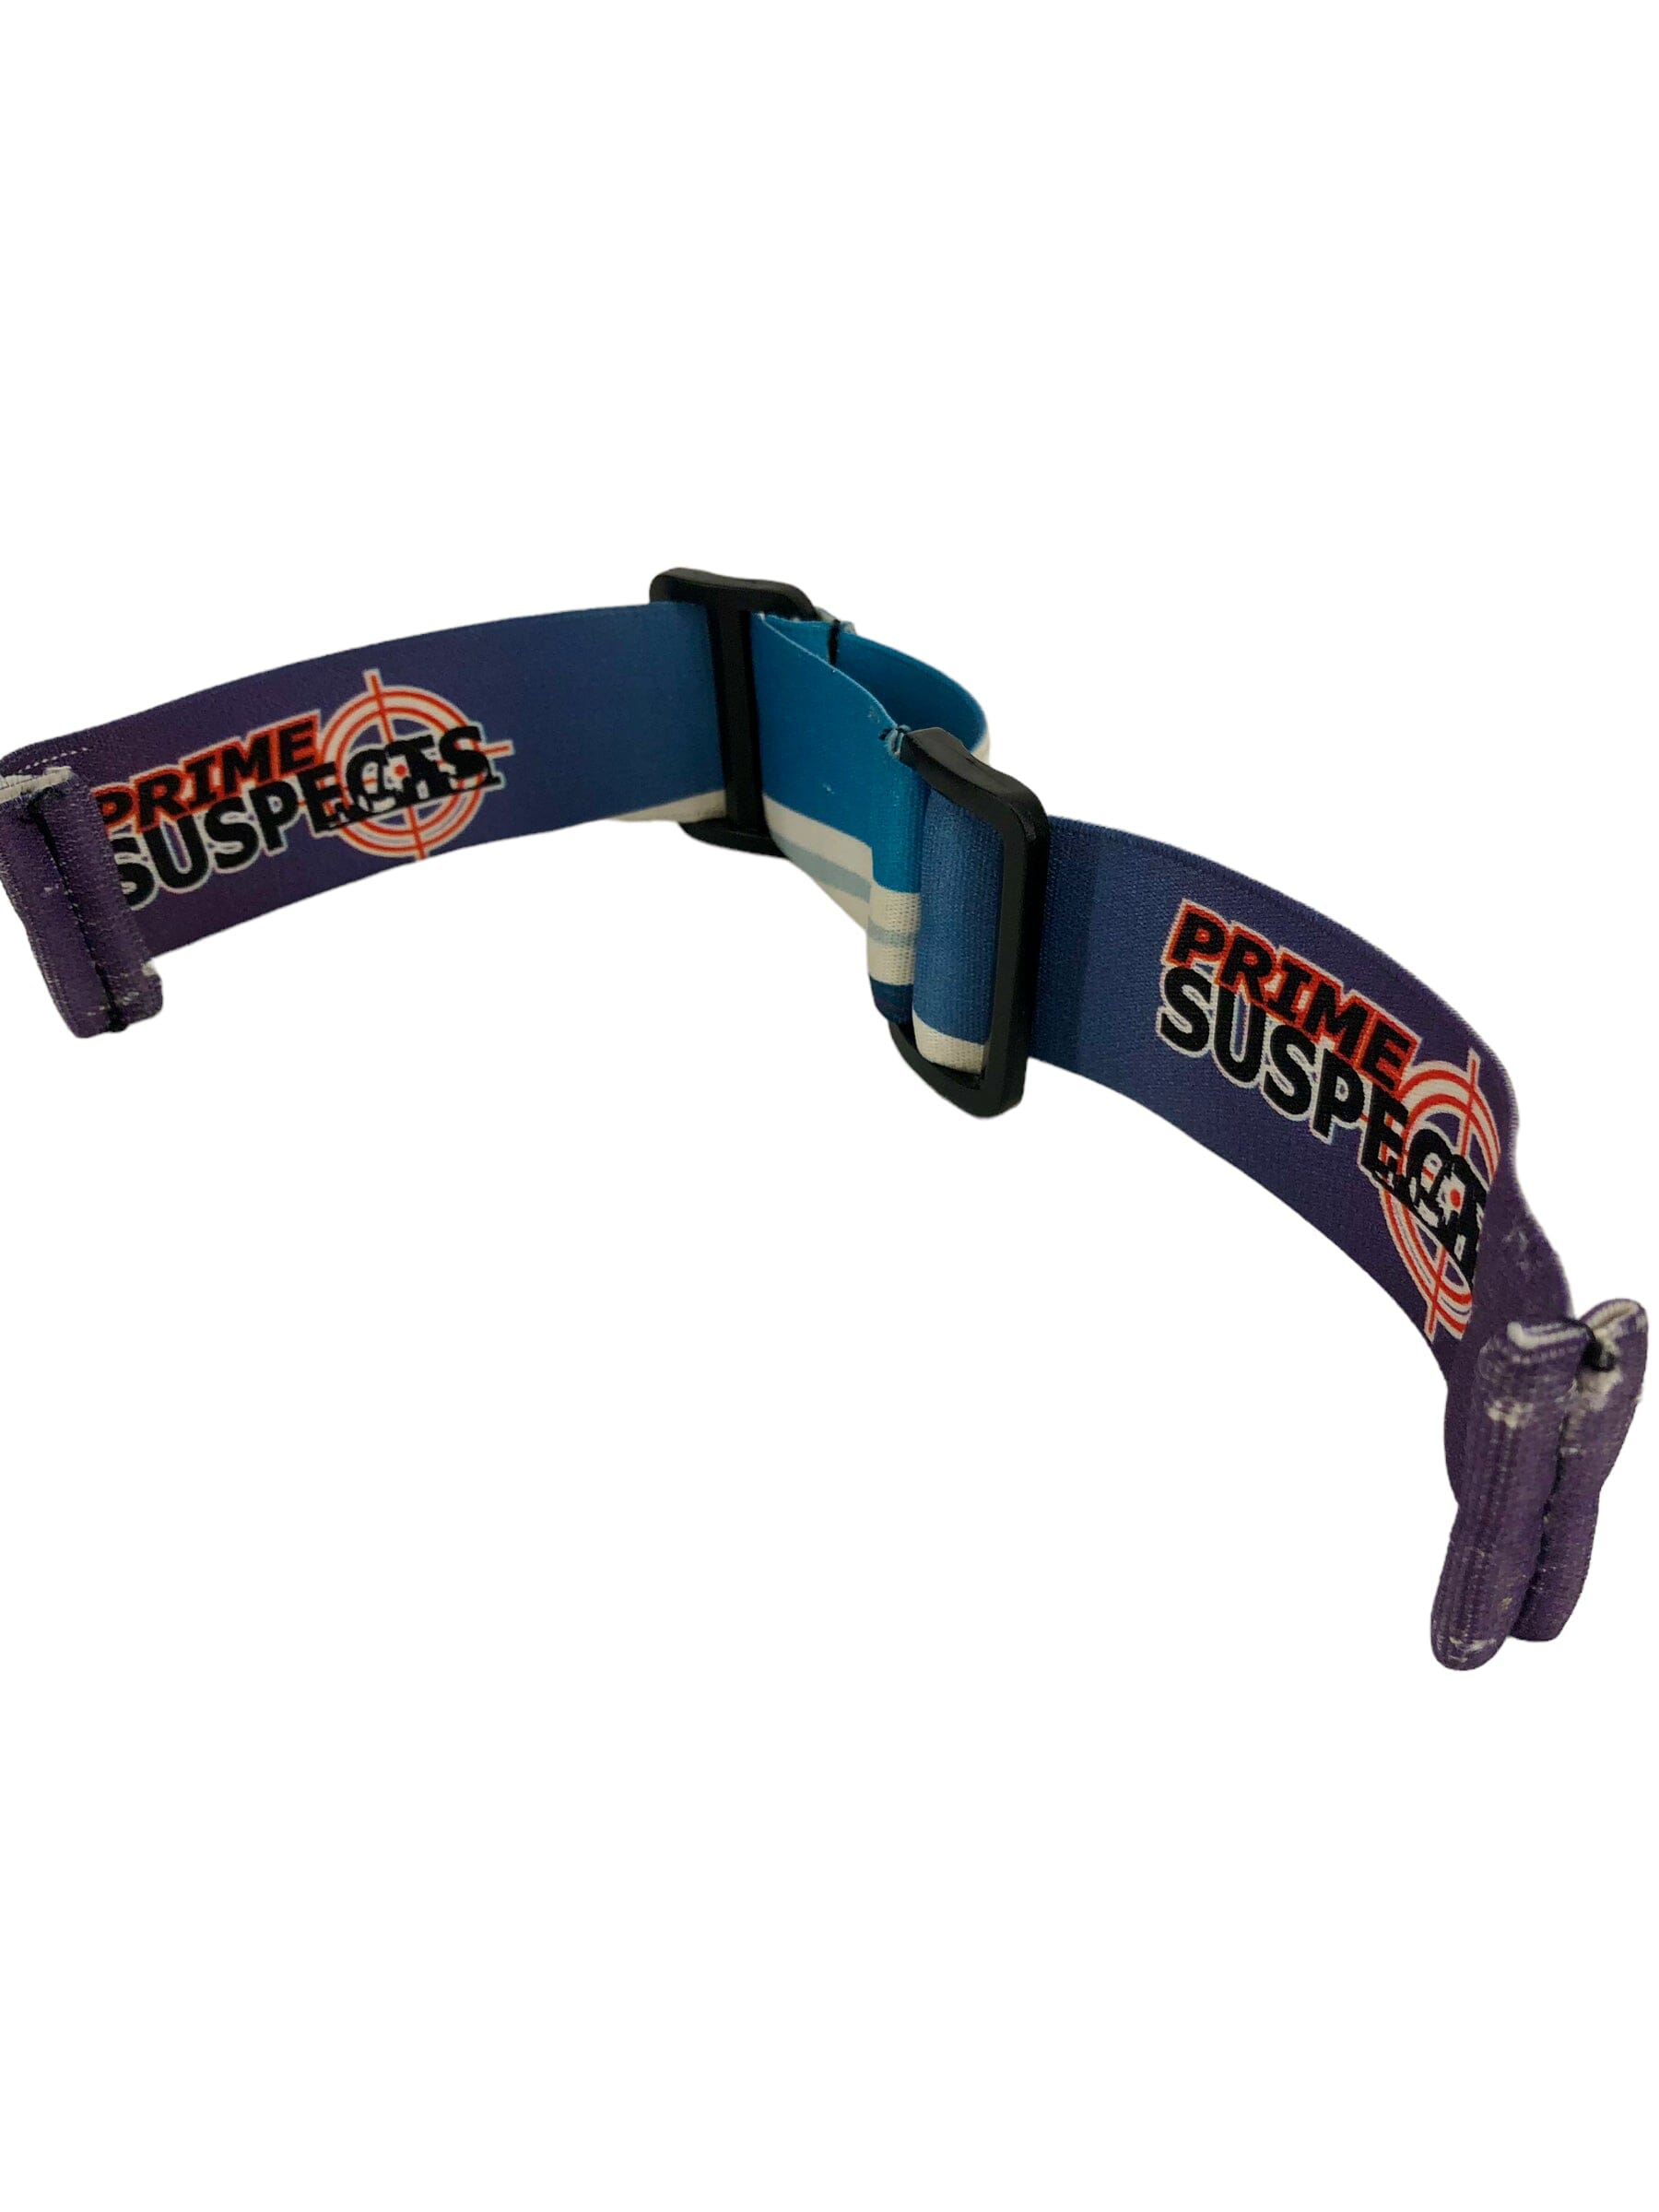 Prime Suspects Mask Strap CPXBrosPaintball 